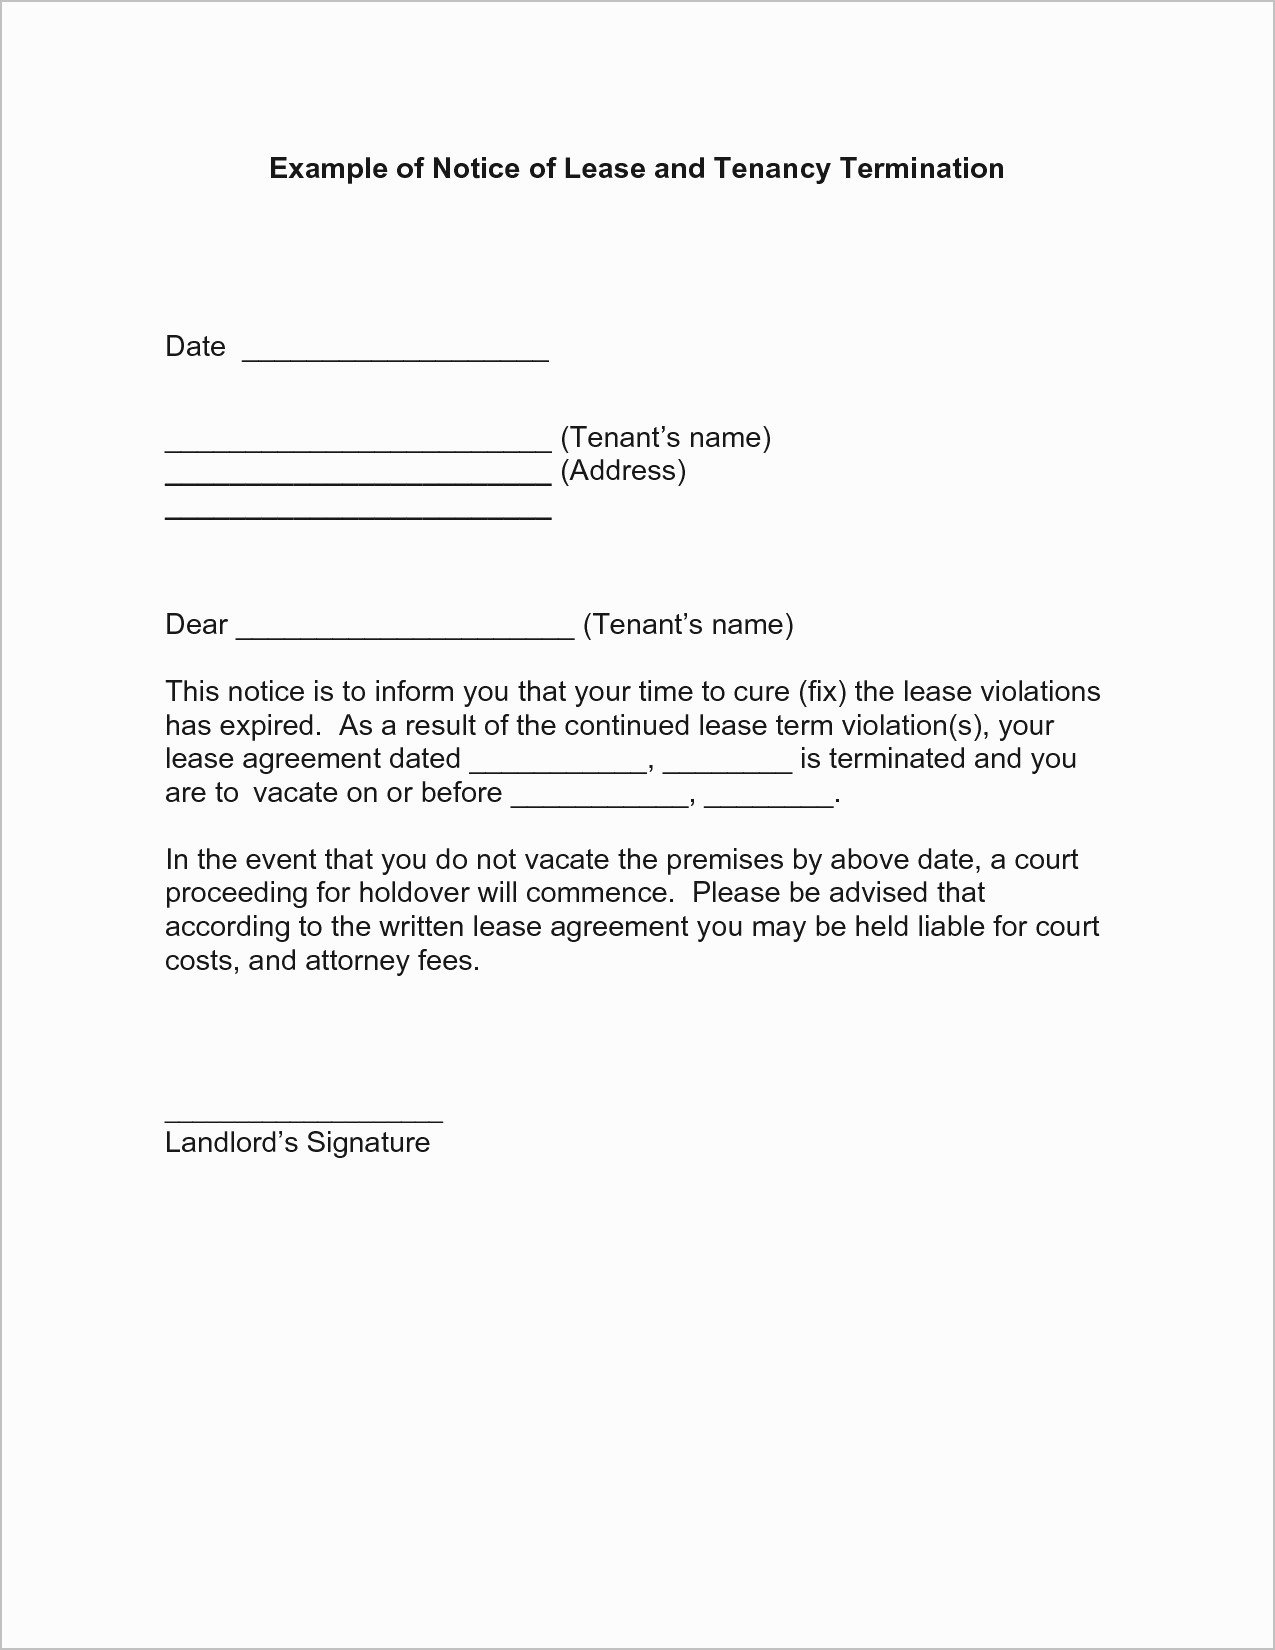 Lease Termination Letter Template Lovely Lease Termination Letter to Tenant Template Collection